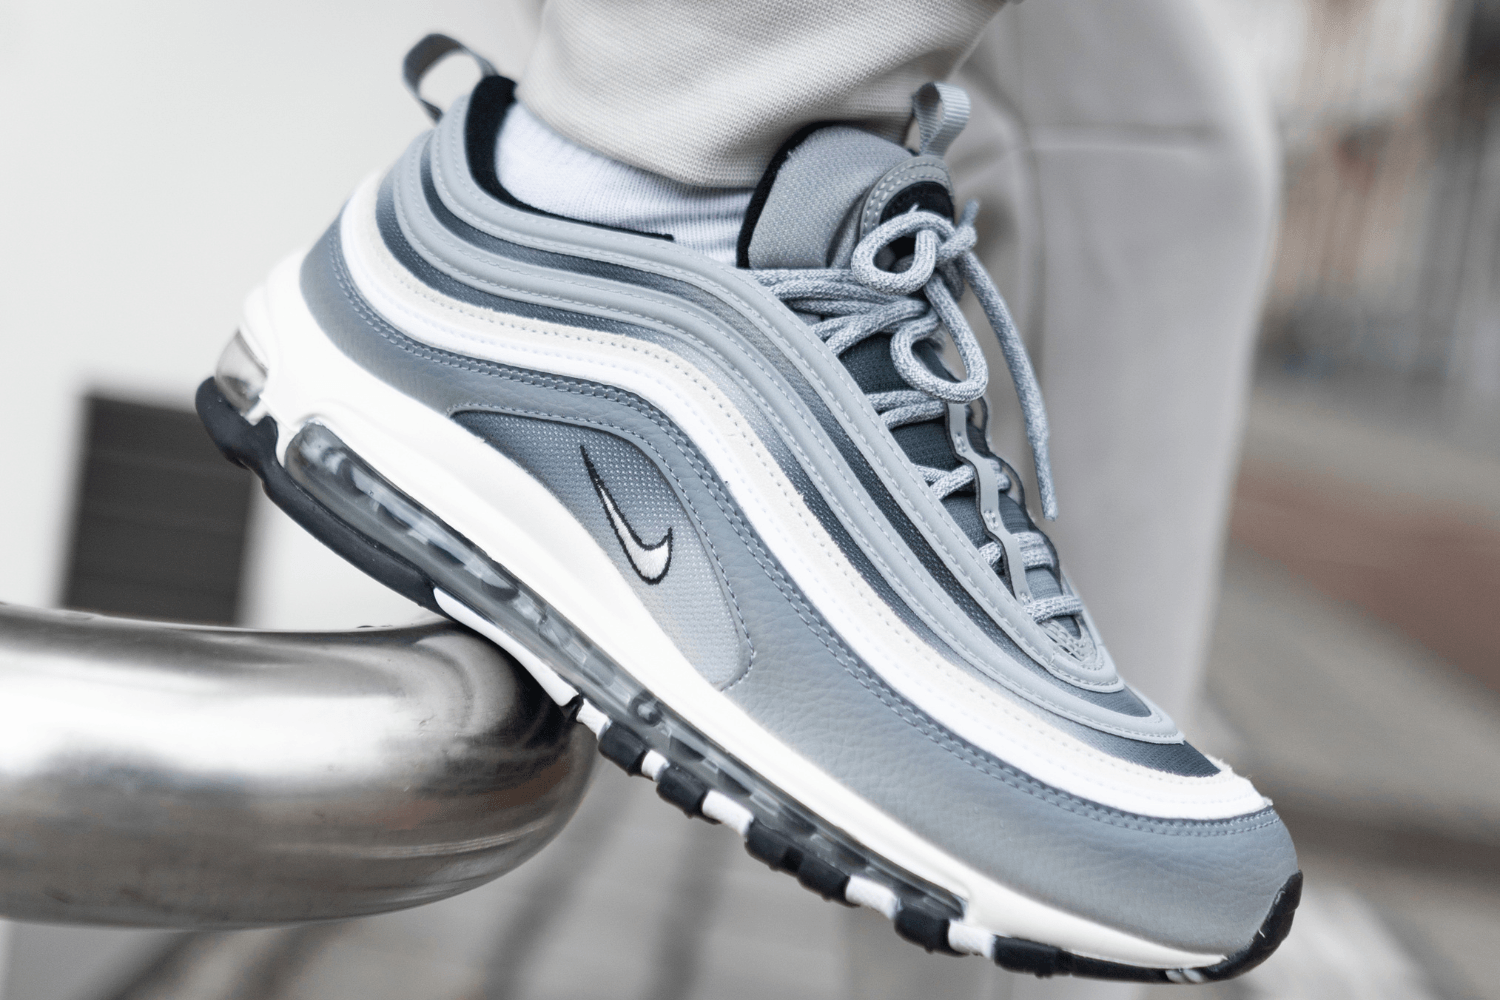 Nike ACG Air Max 97 'Cool Grey' available exclusively at Snipes